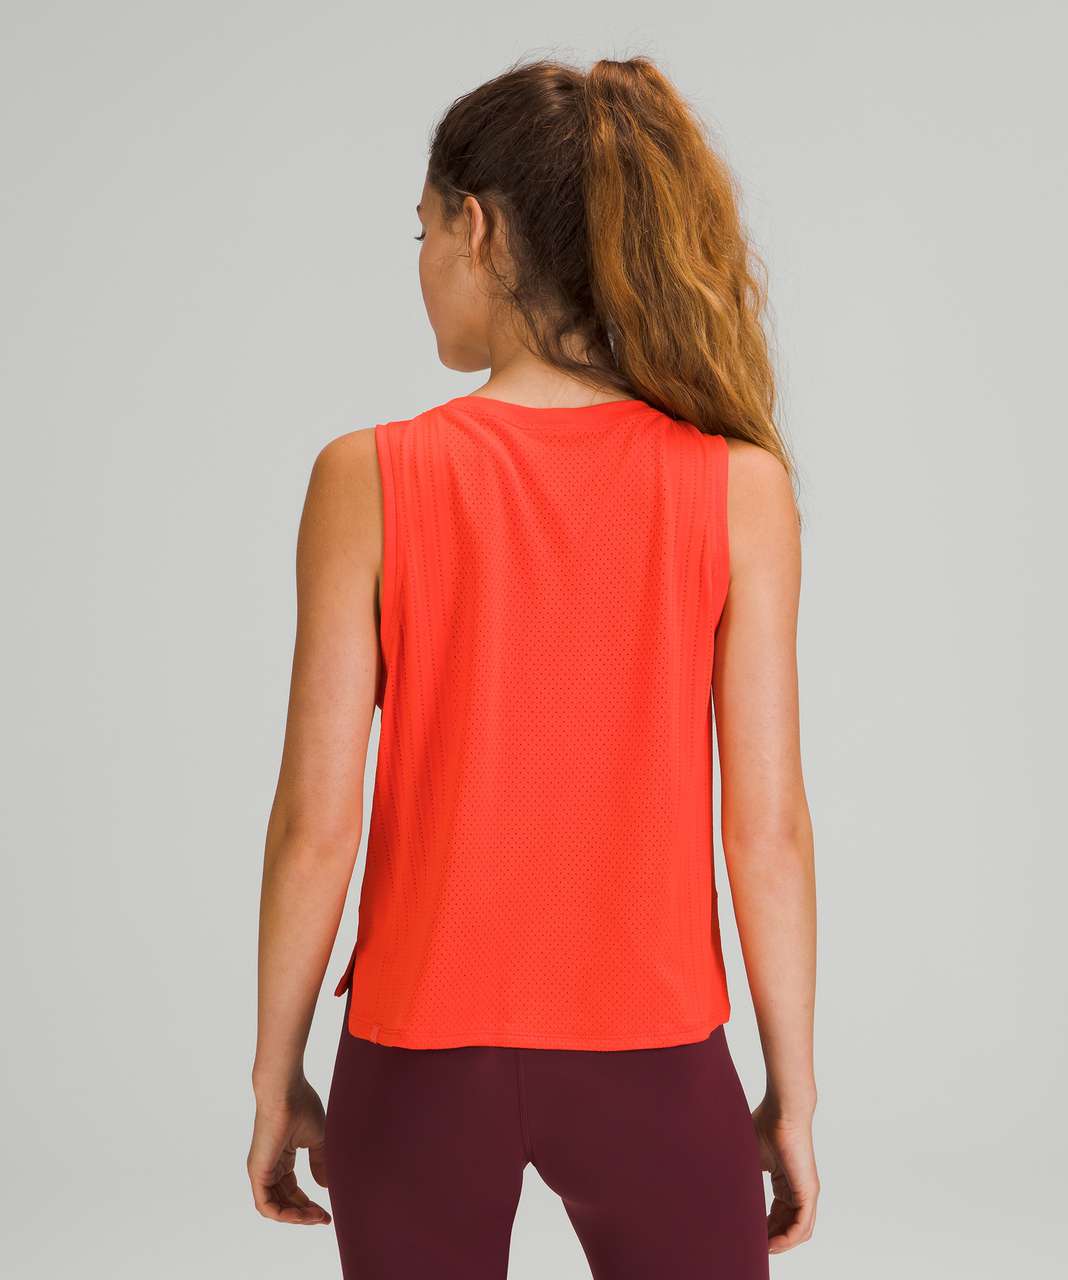 Lululemon Train to Be Tank Top - Autumn Red / Autumn Red